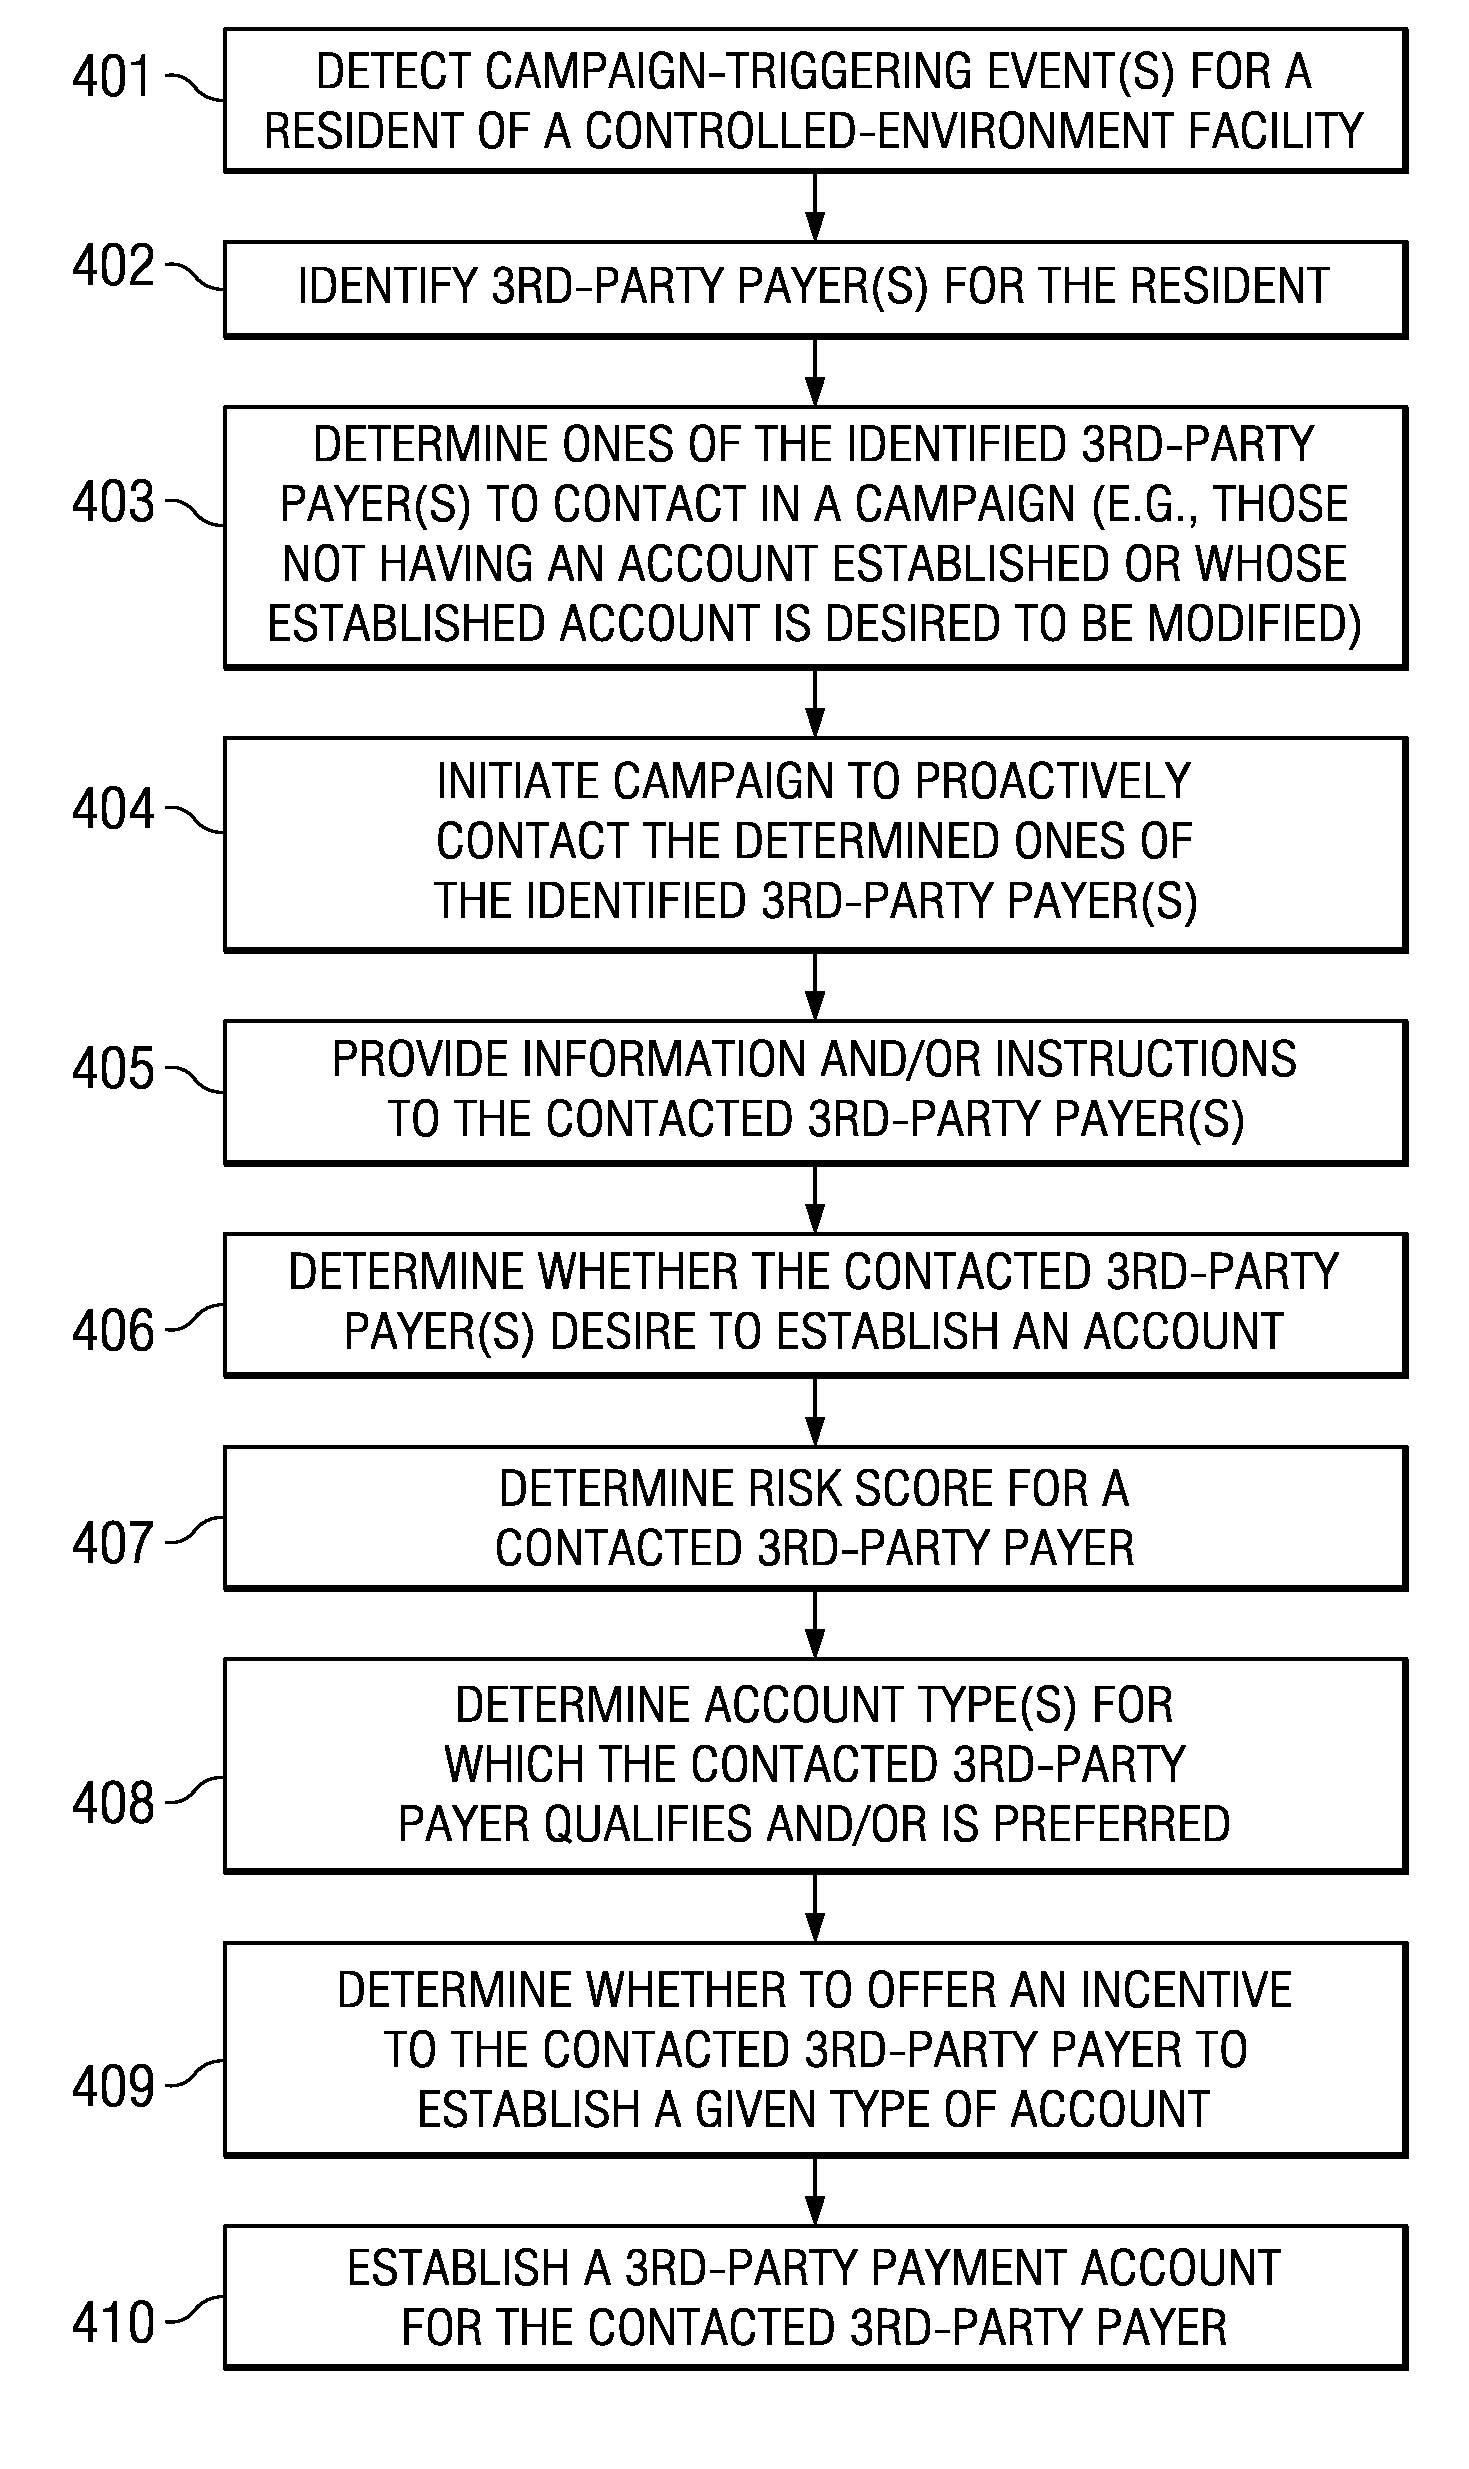 System and Method for Proactively Establishing a Third-Party Payment Account for Services Rendered to a Resident of a Controlled-Environment Facility